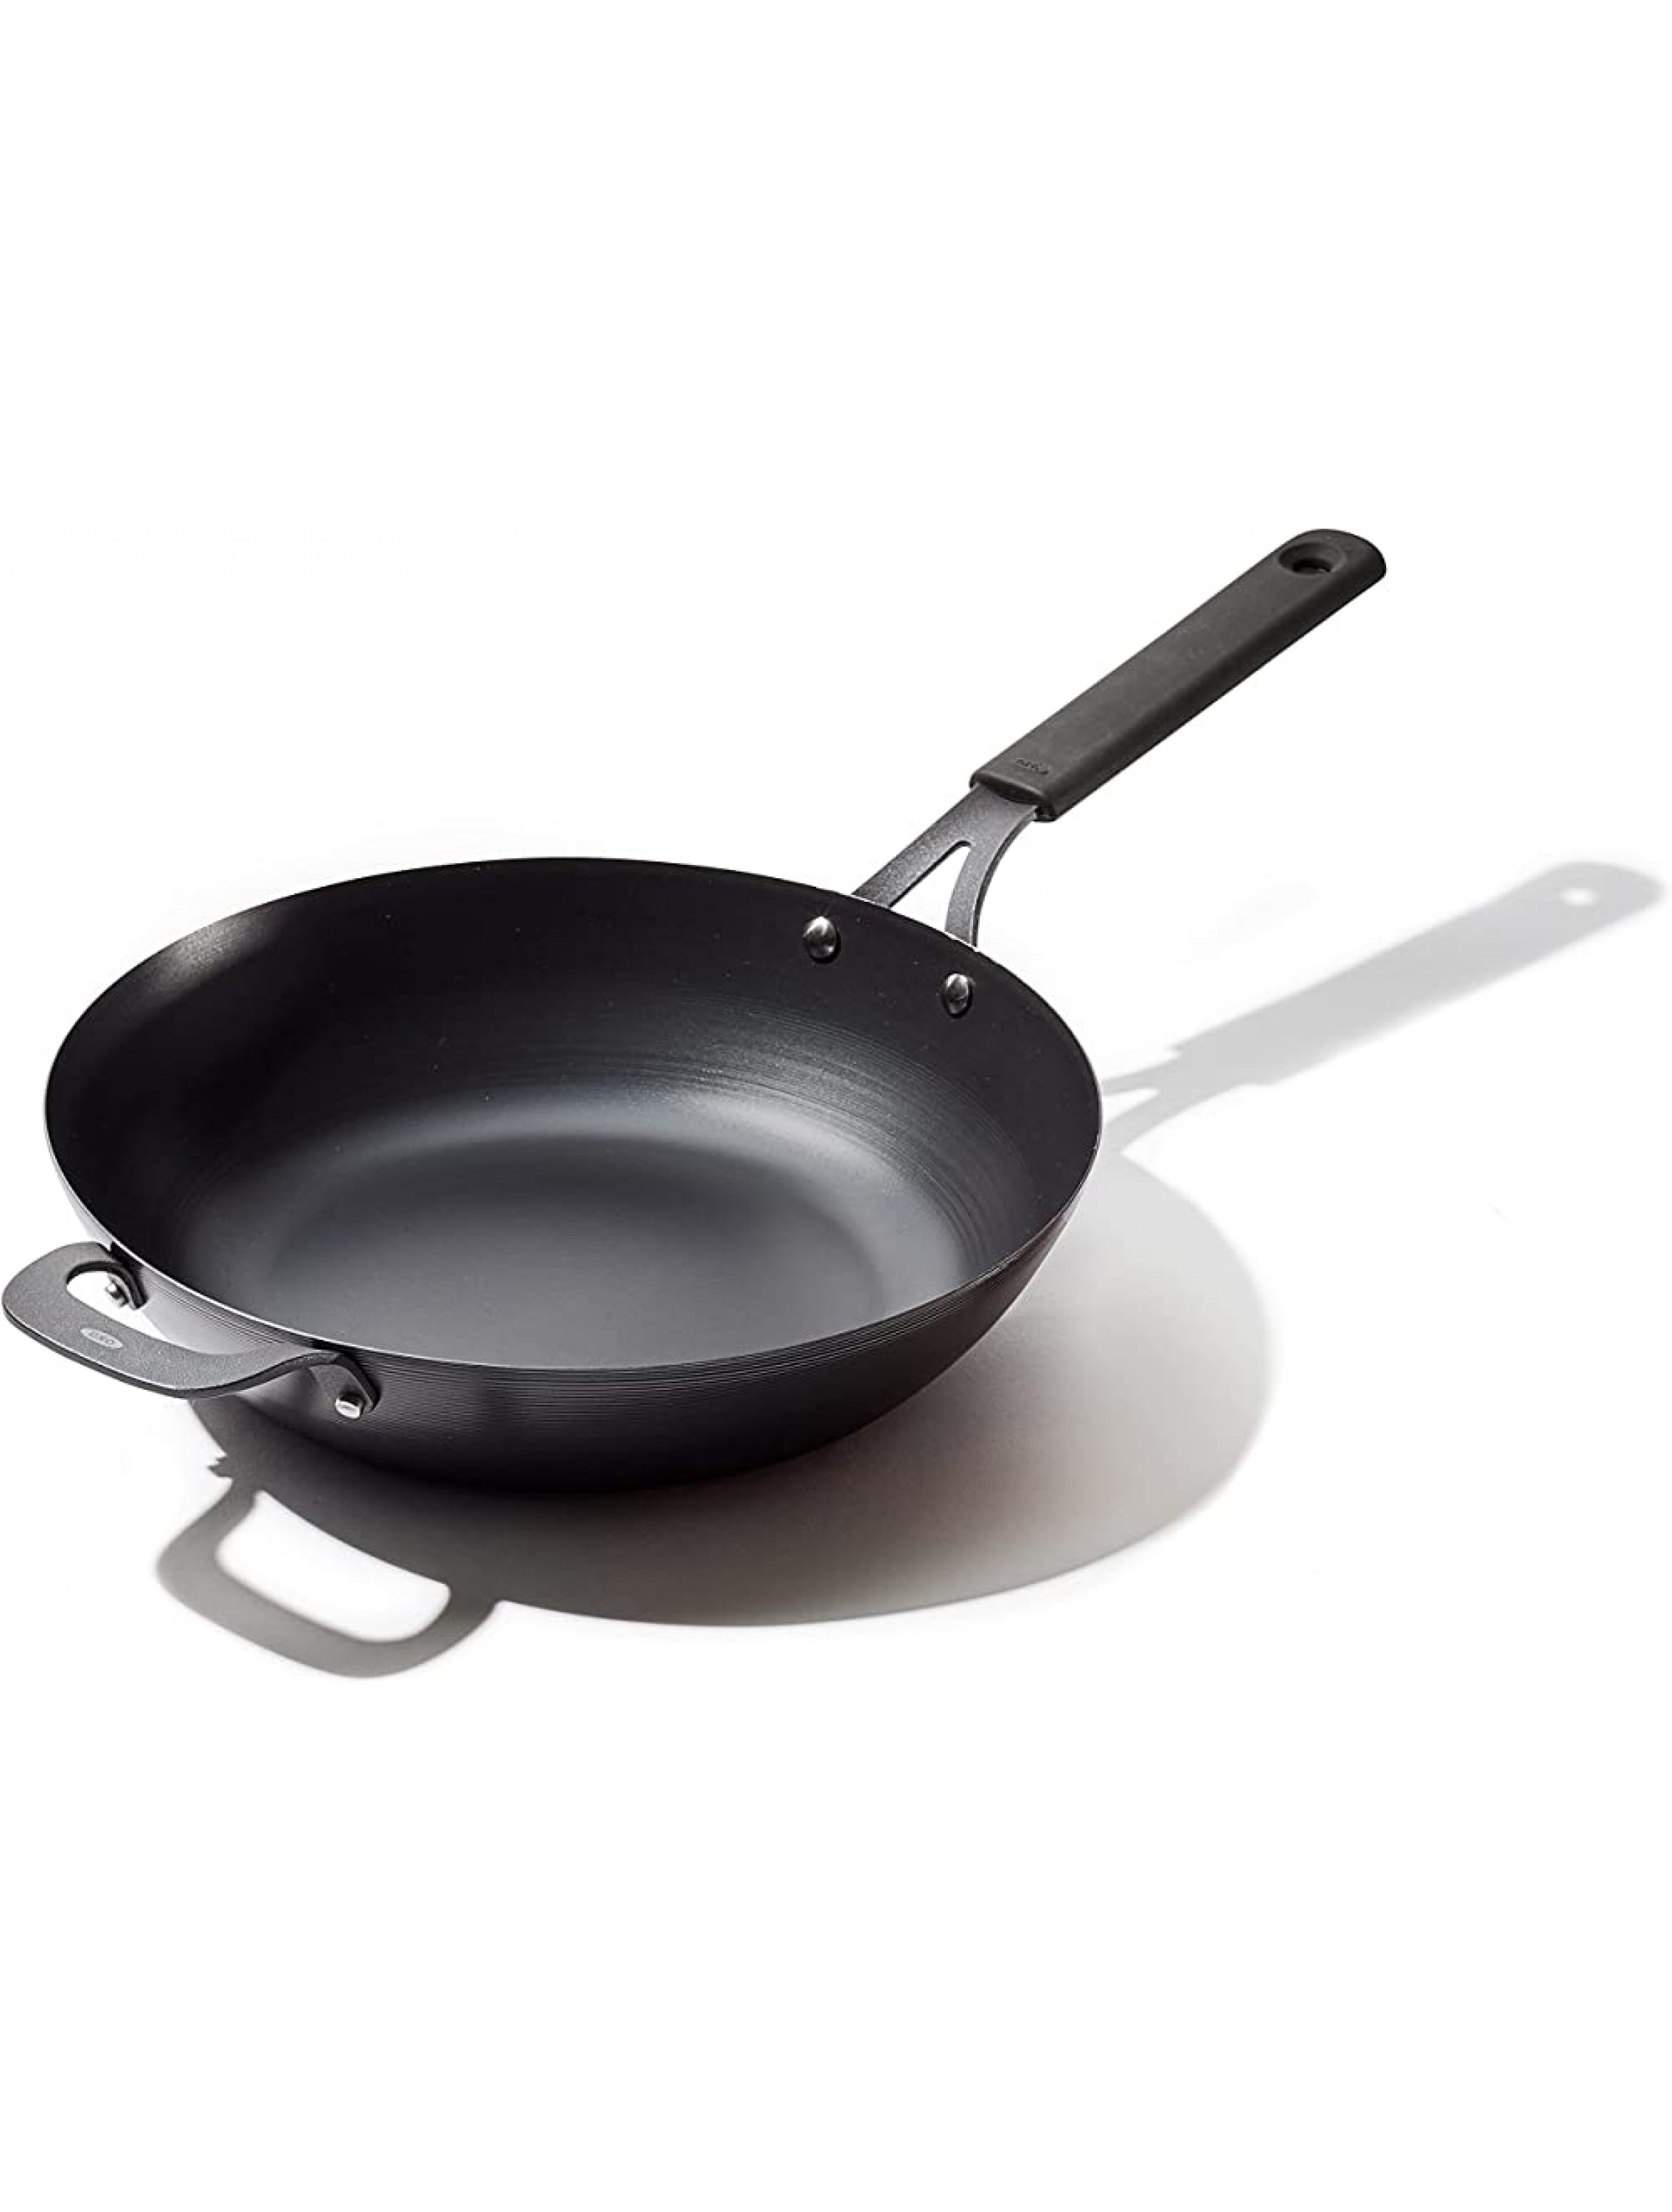 OXO Obsidian Pre-Seasoned Carbon Steel 12 Wok Pan with Removable Silicone Handle Holder Induction Oven Safe Black - BZZDTZBJH